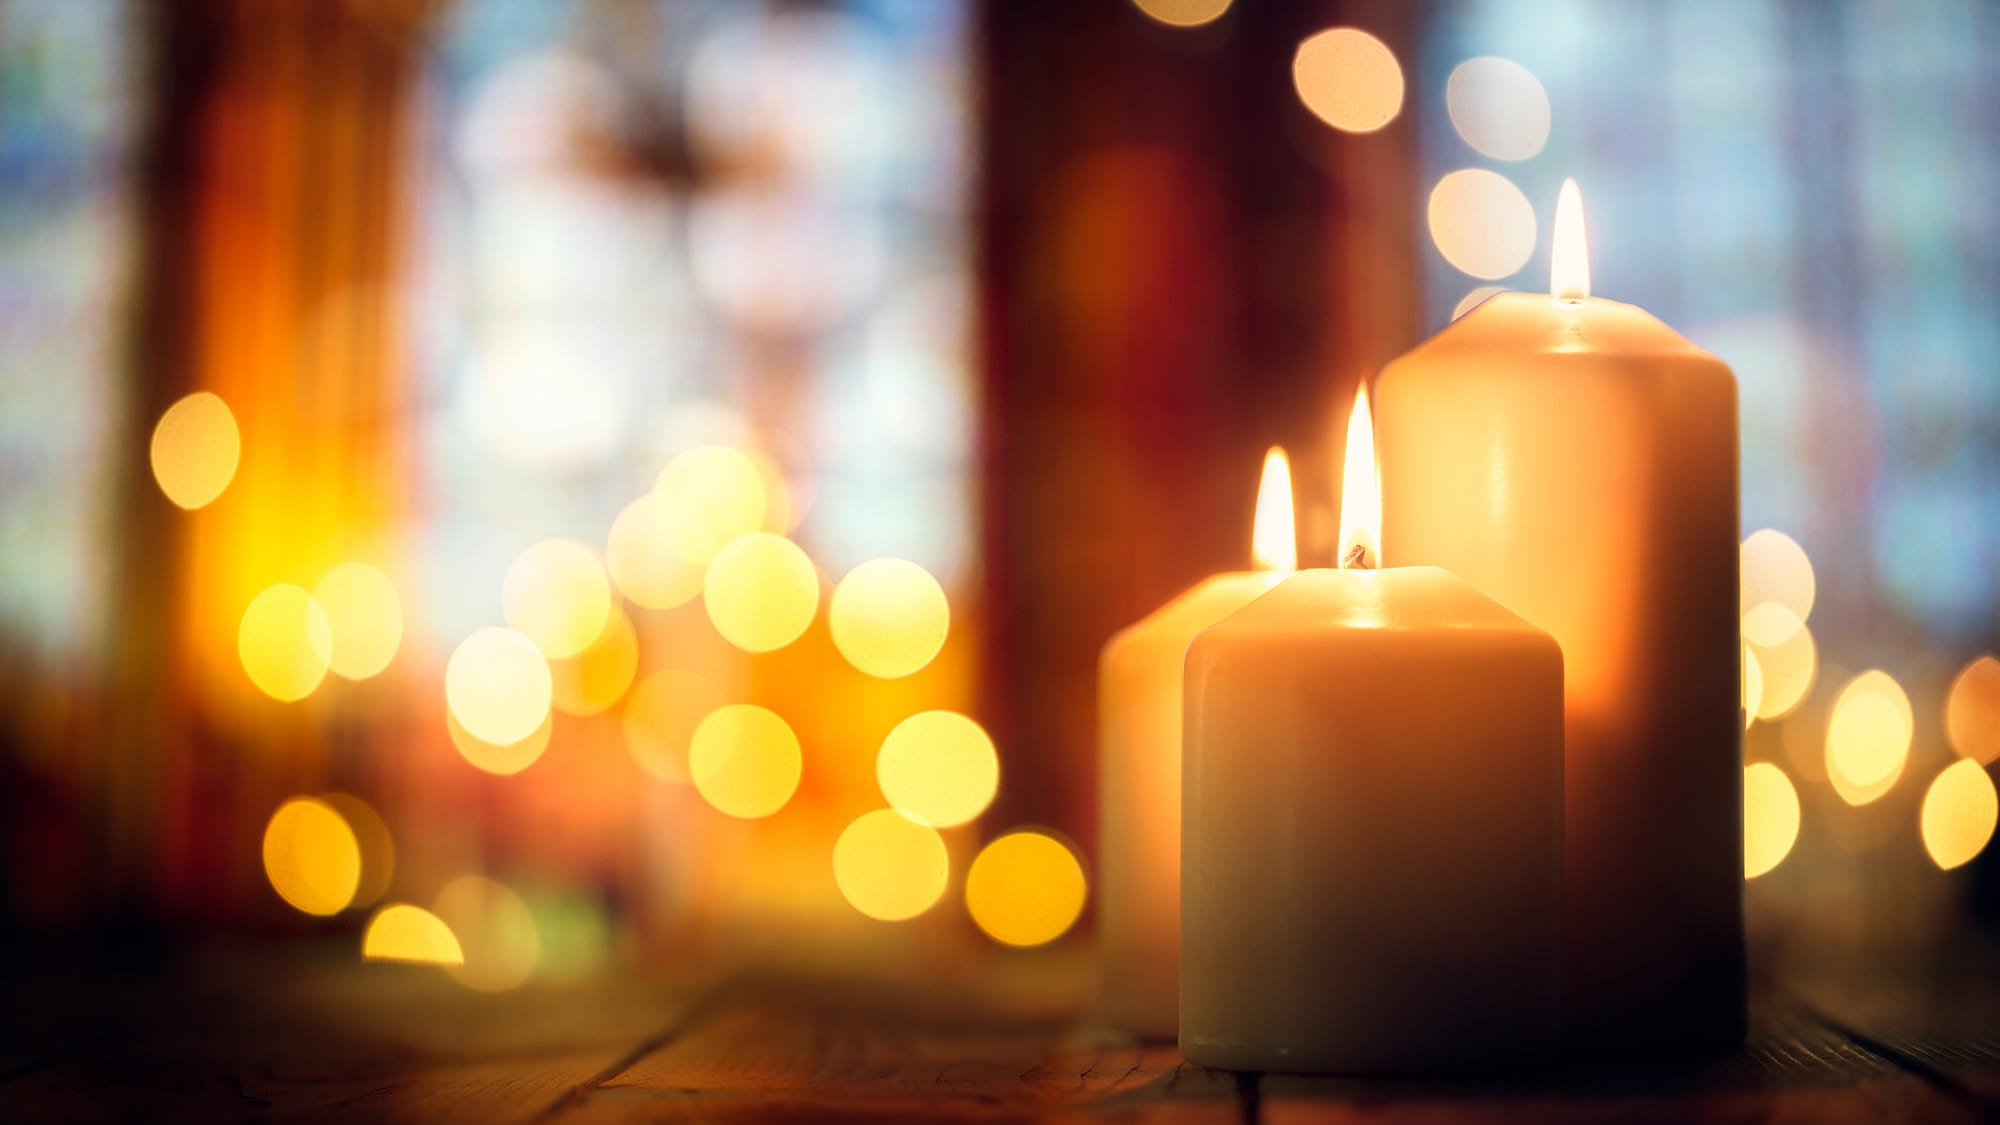 Close up of lit candles with large church windows in the background.